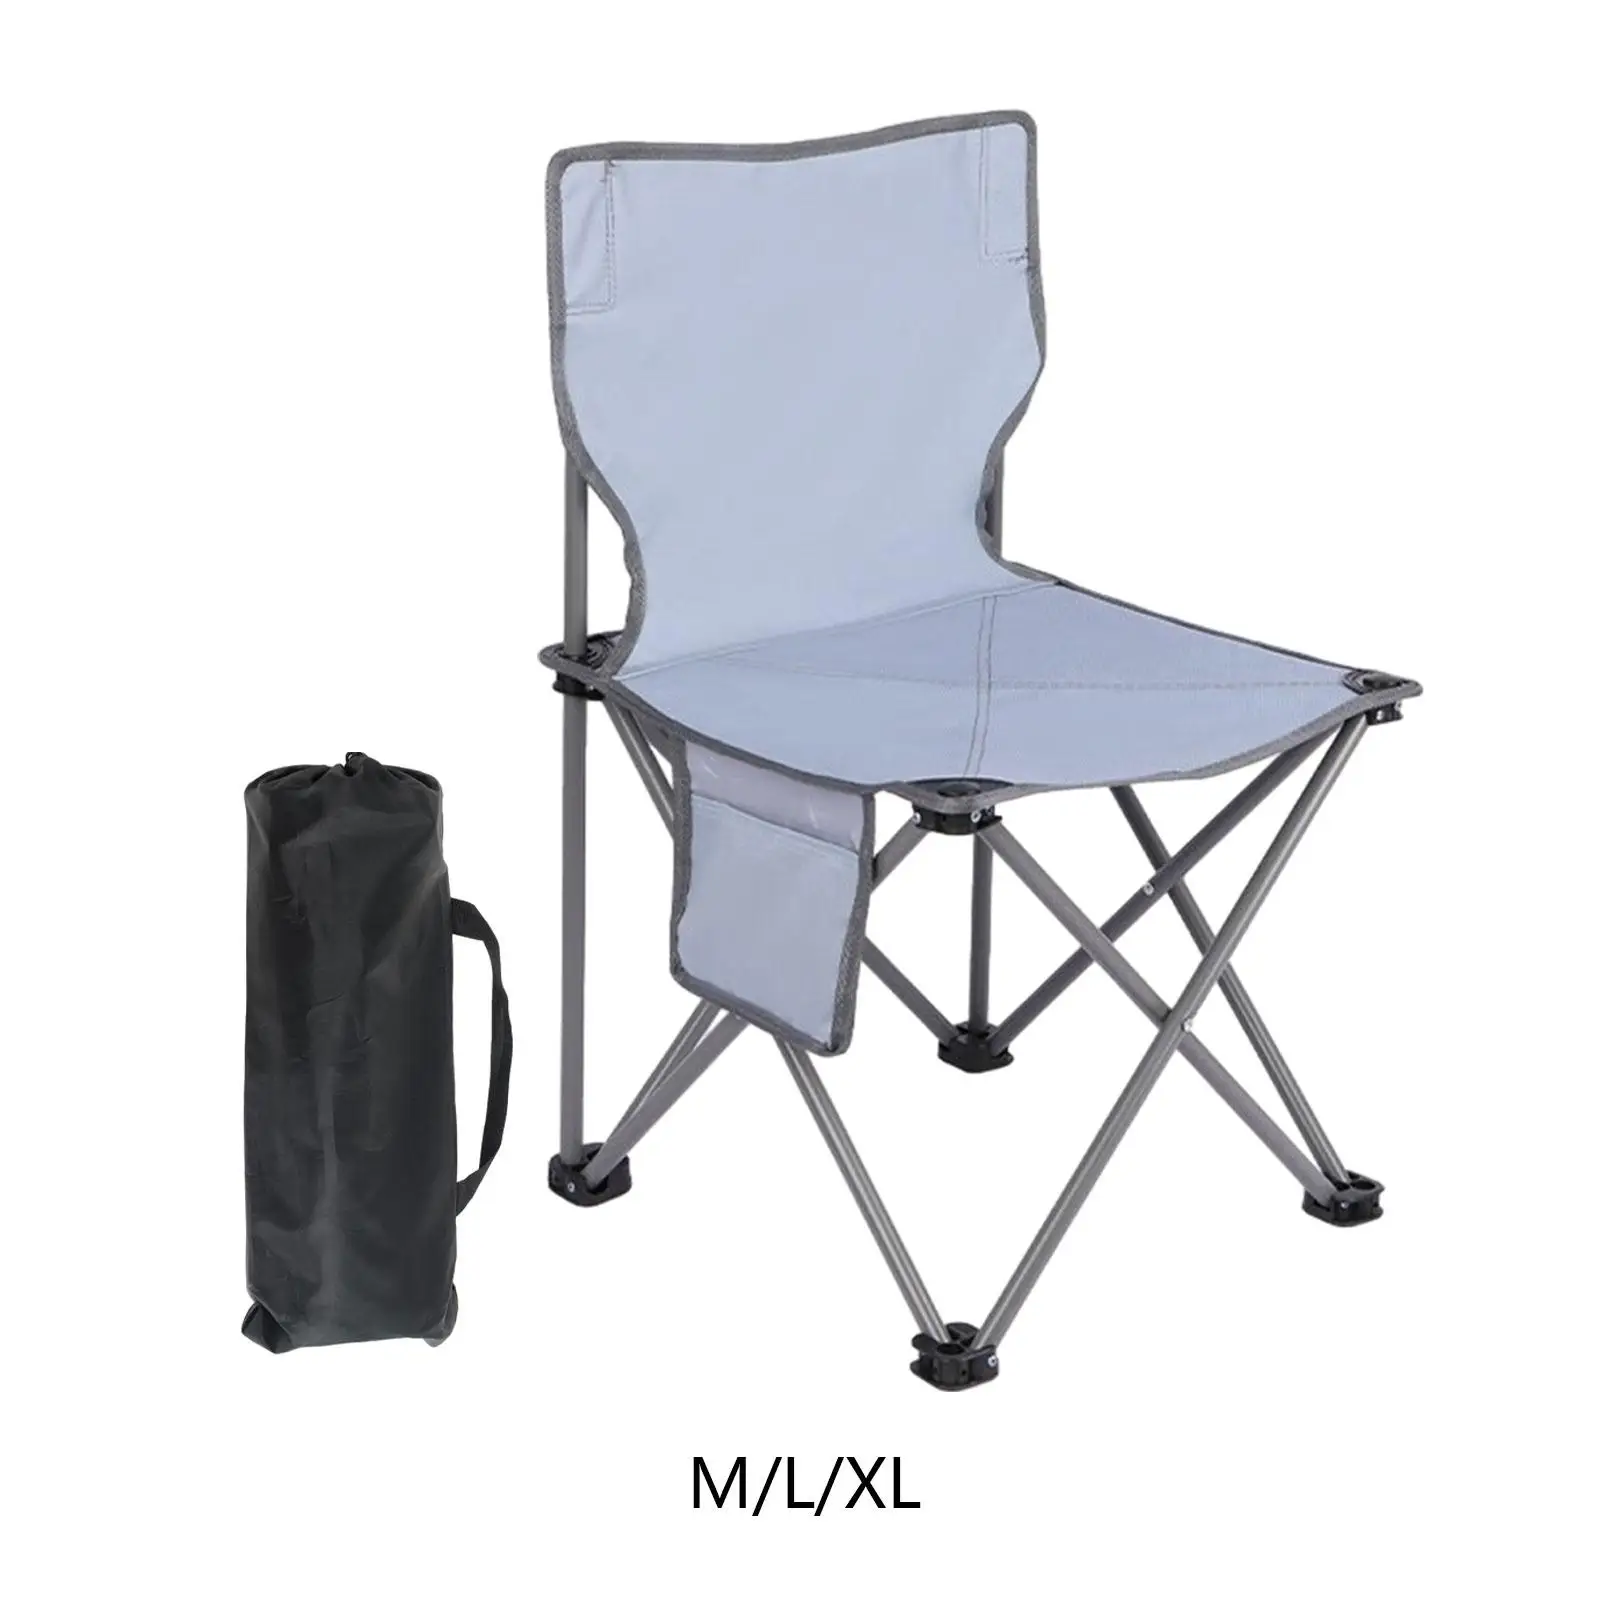 Portable Camping Chair High Back with Storage Bag Nonslip Folding Chair Fishing Chair for Park Picnic Patio Garden Backpacking